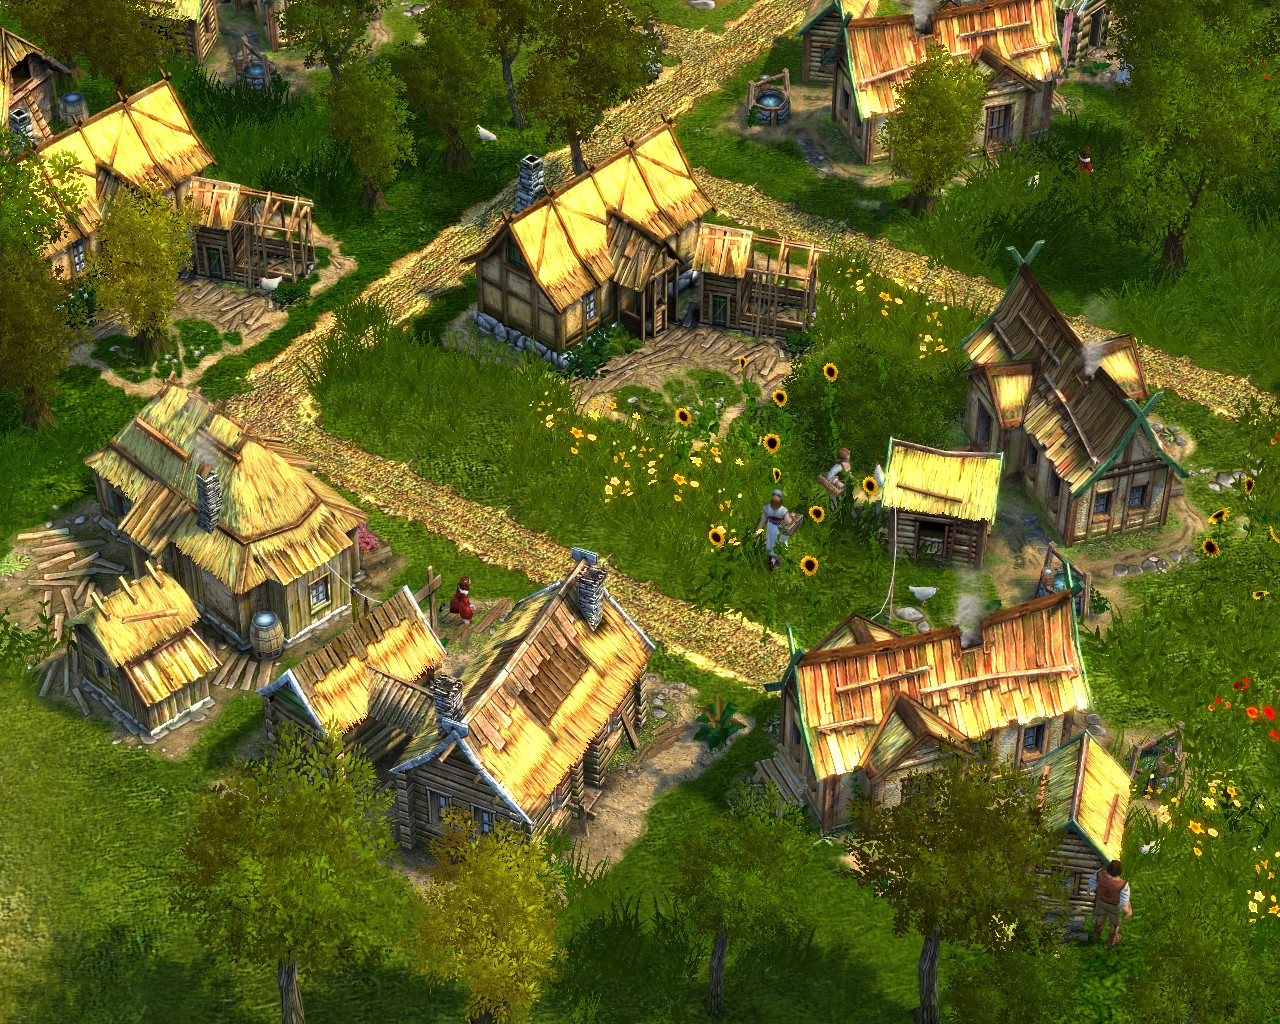 1701 ad game download